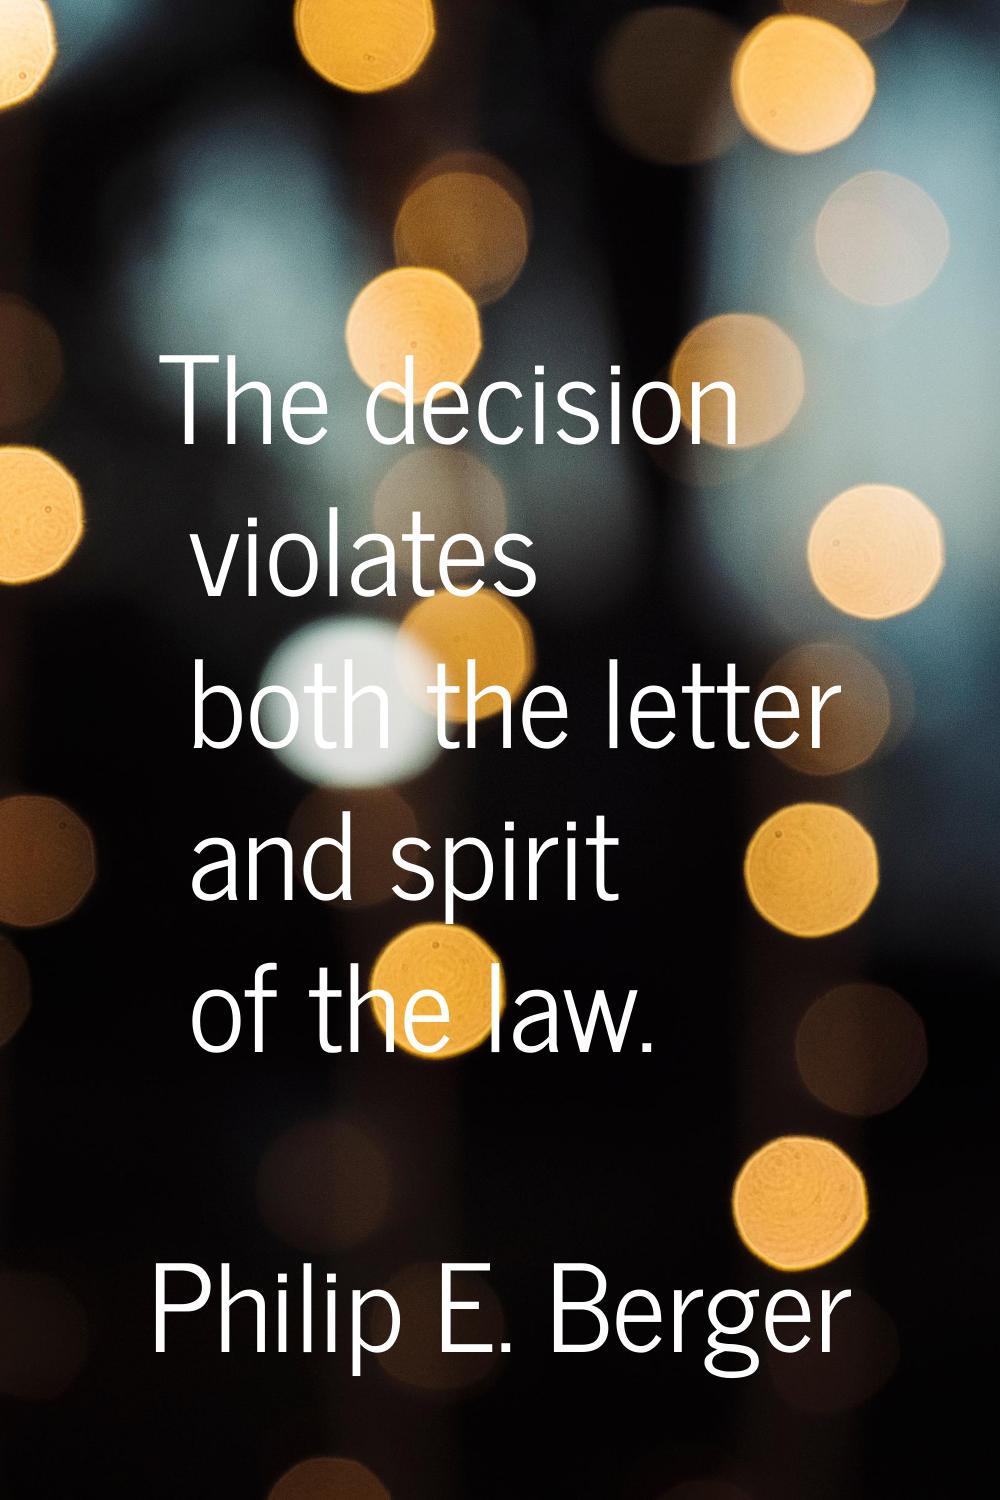 The decision violates both the letter and spirit of the law.